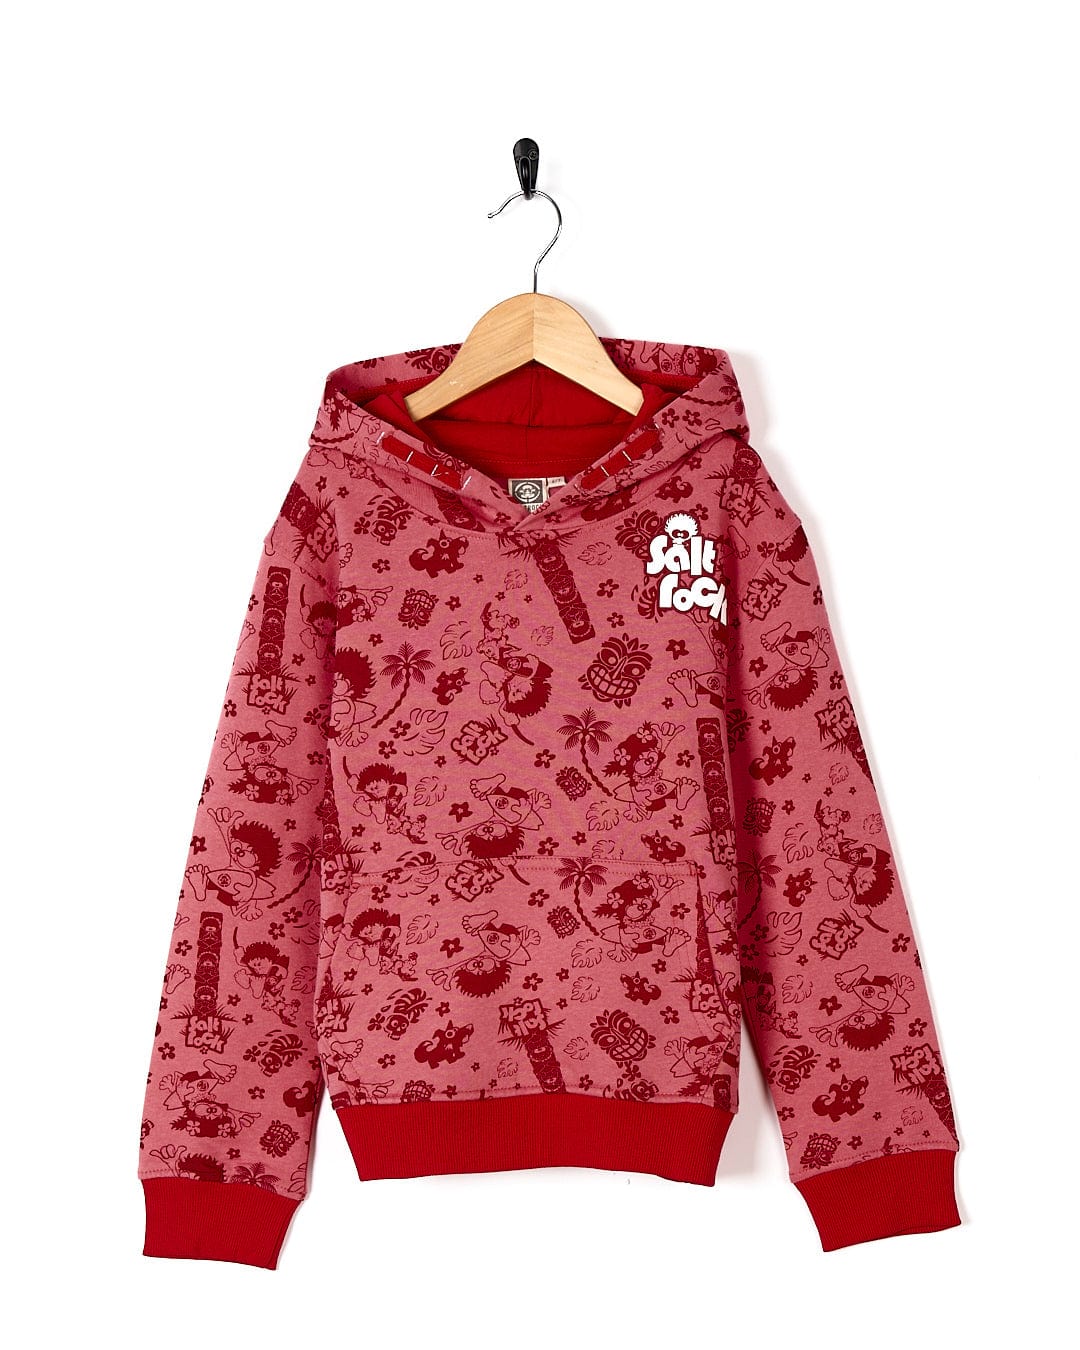 A Saltrock Tiki Tok - Kids Pop Hoodie - Red with hearts on it.